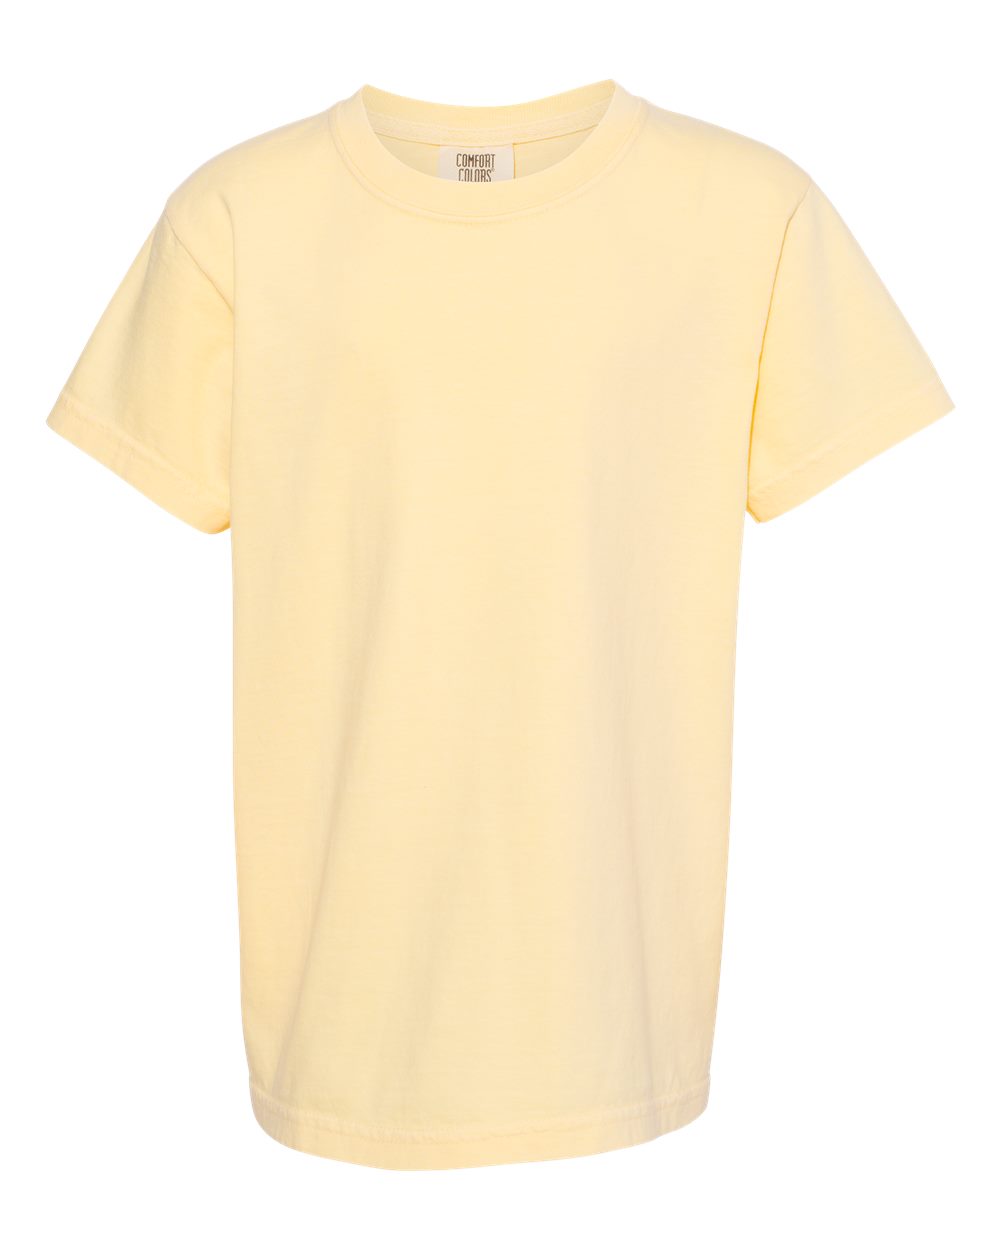 Youth "Build A Tee" - Comfort Colors Blank Short Sleeve T-Shirt